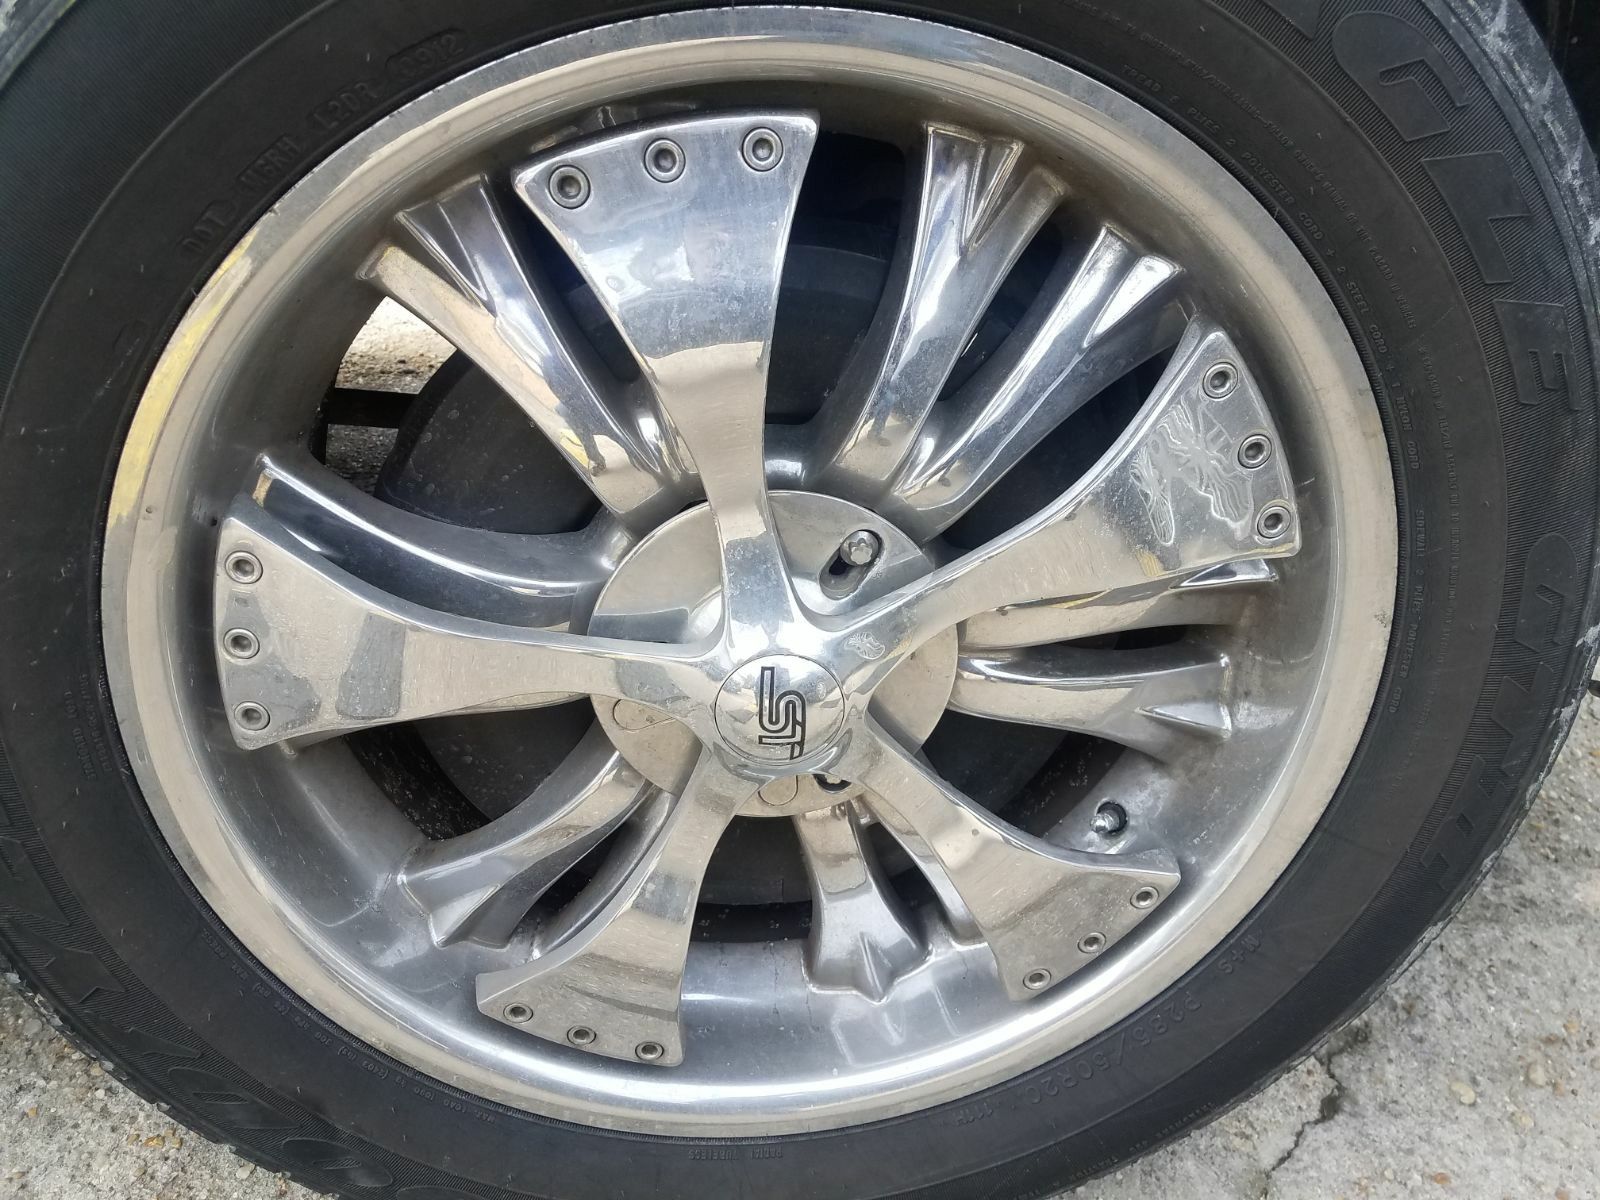 20 in 6 lug spinner wheels tire size 285 50 R20 in great condition